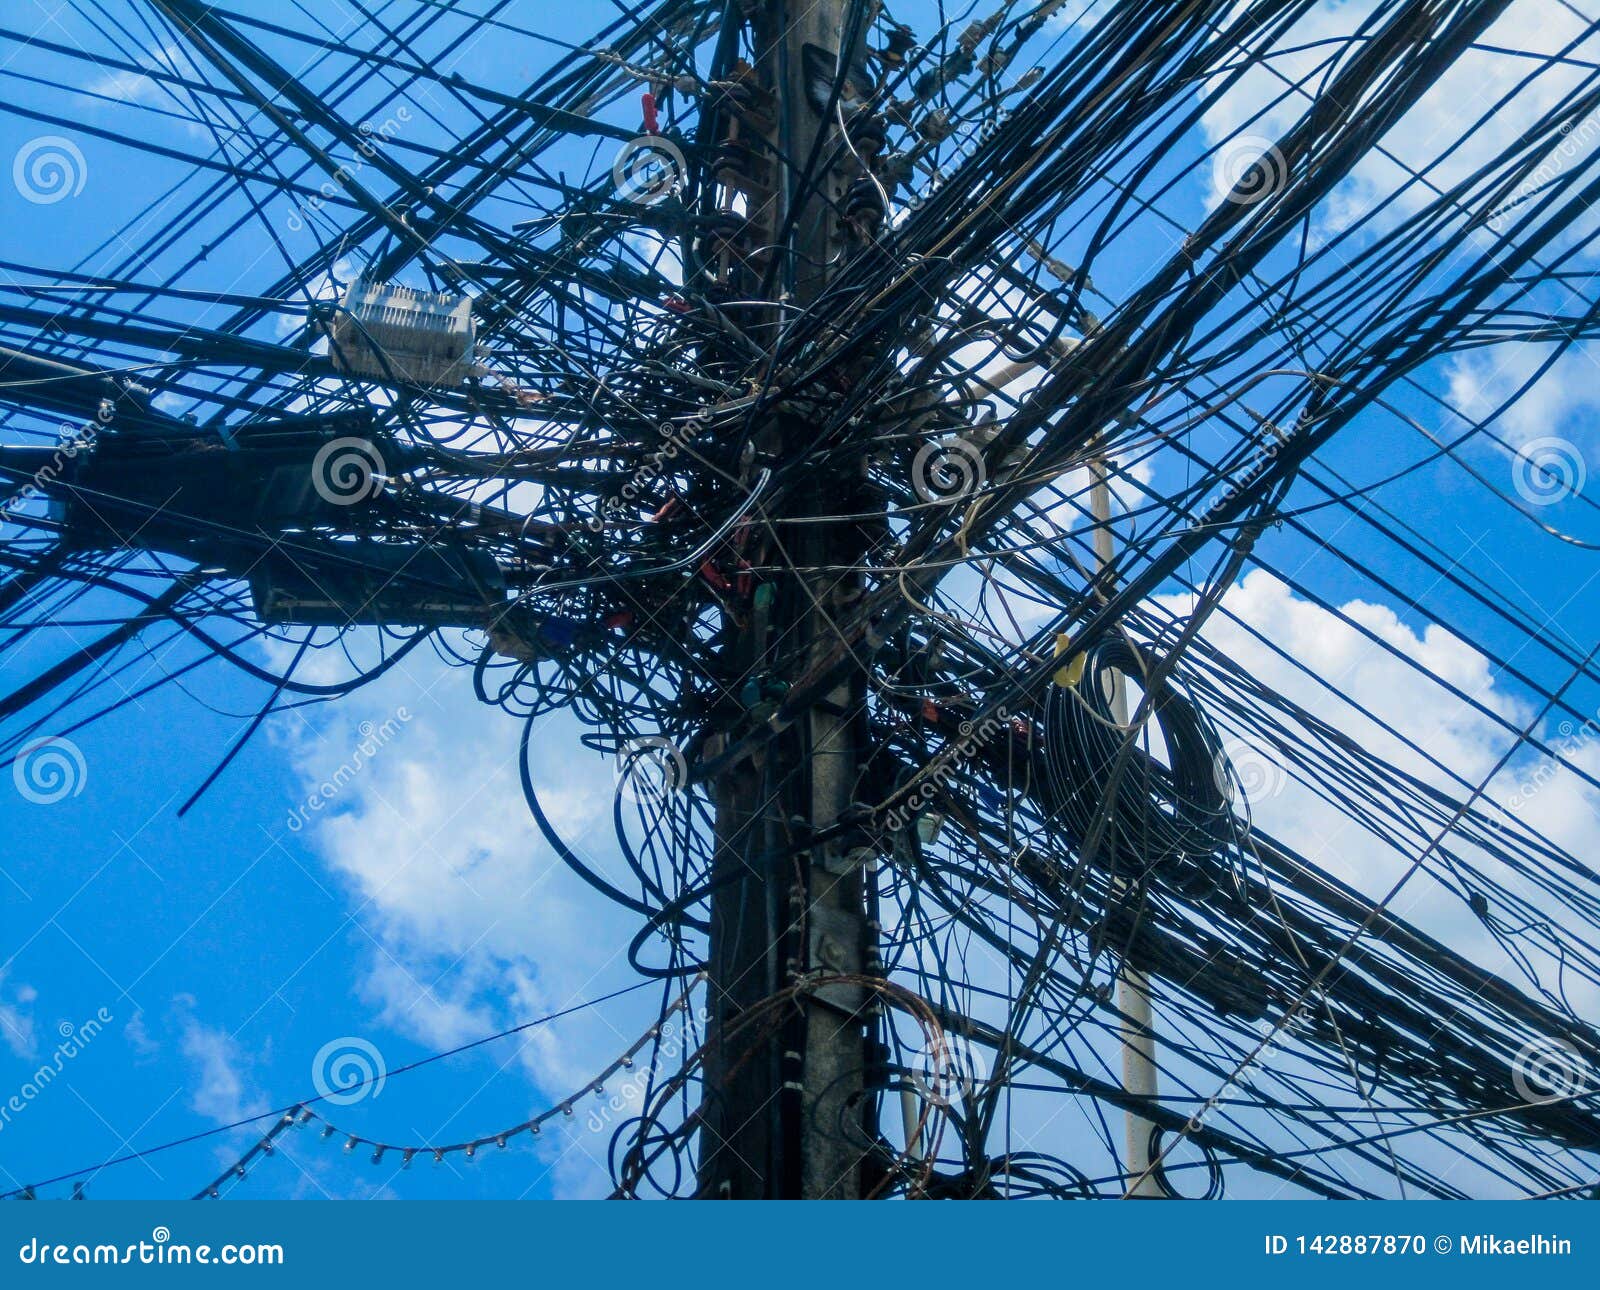 chaos-cables-wires-electric-pole-thailand-wire-cable-clutter-142887870.jpg